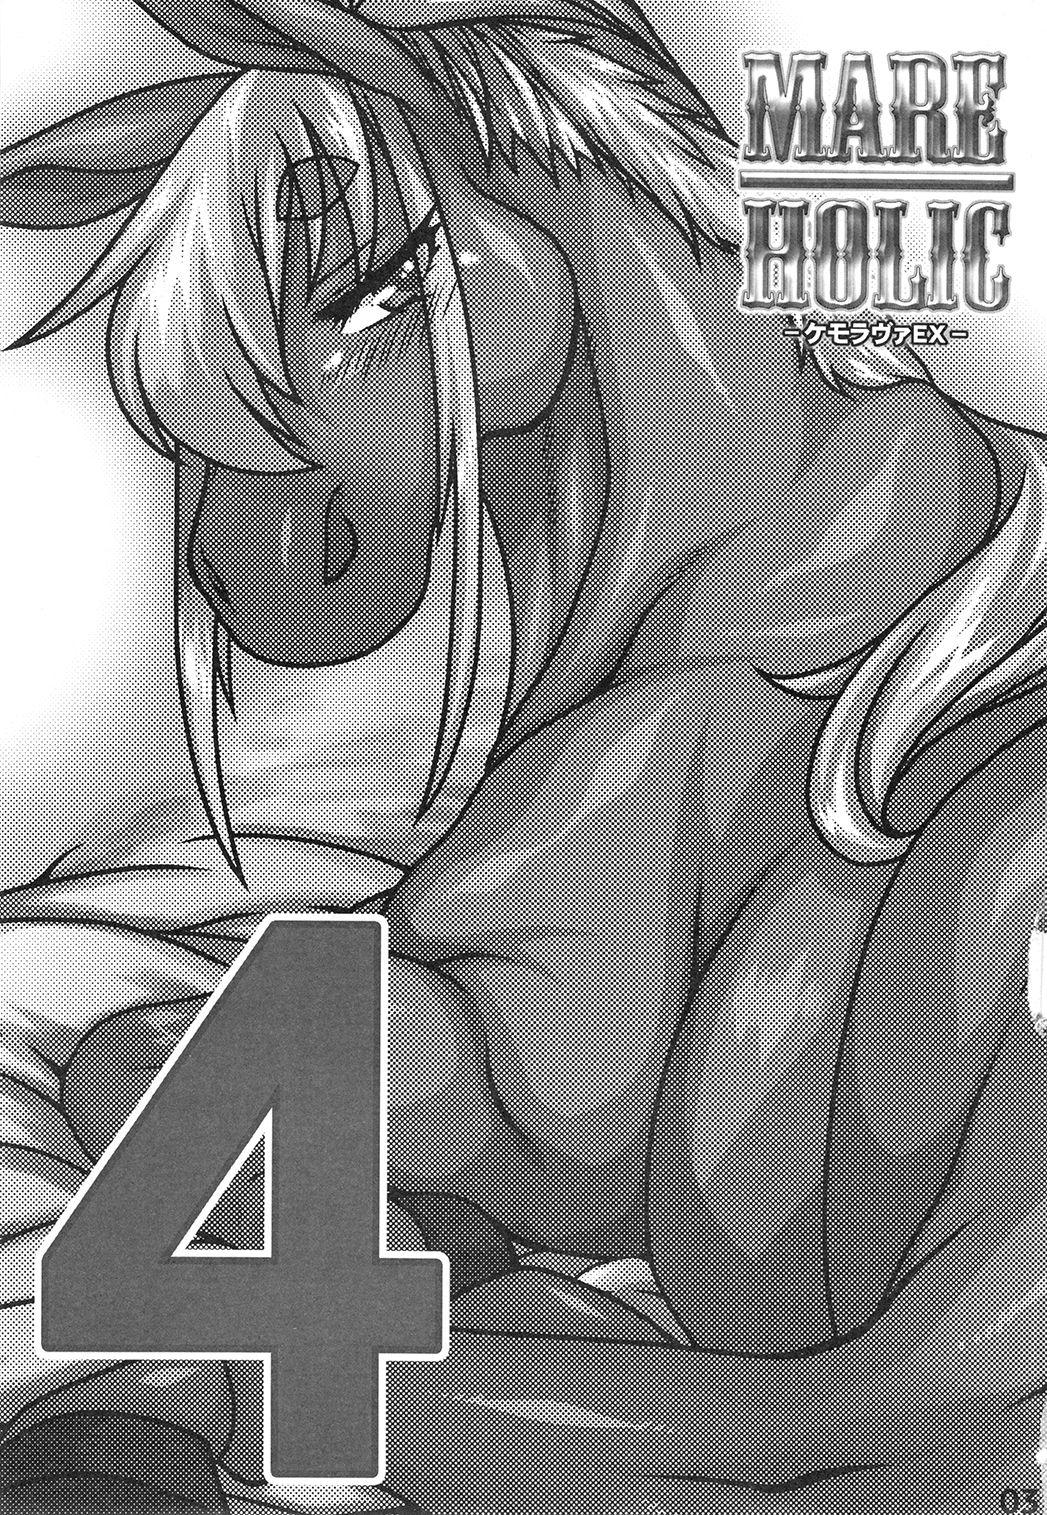 Staxxx Mare Holic 4 Kemolover EX ch 4+8+10 Pervert - Page 2